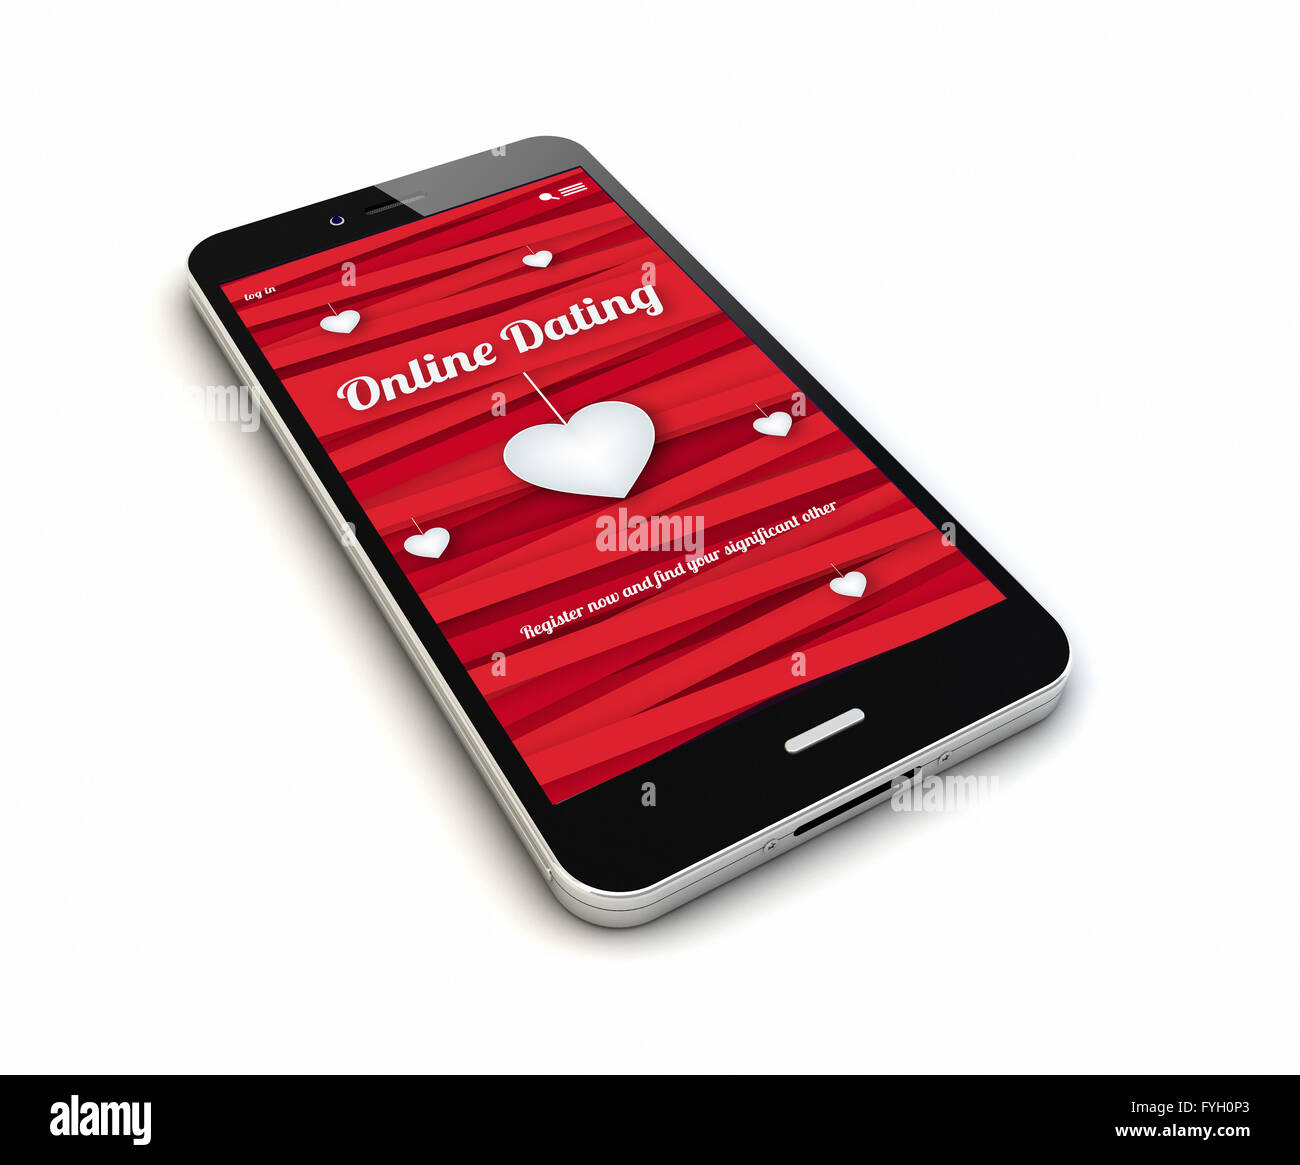 render of an original smartphone with online dating on the screen. Screen graphics are made up. Stock Photo